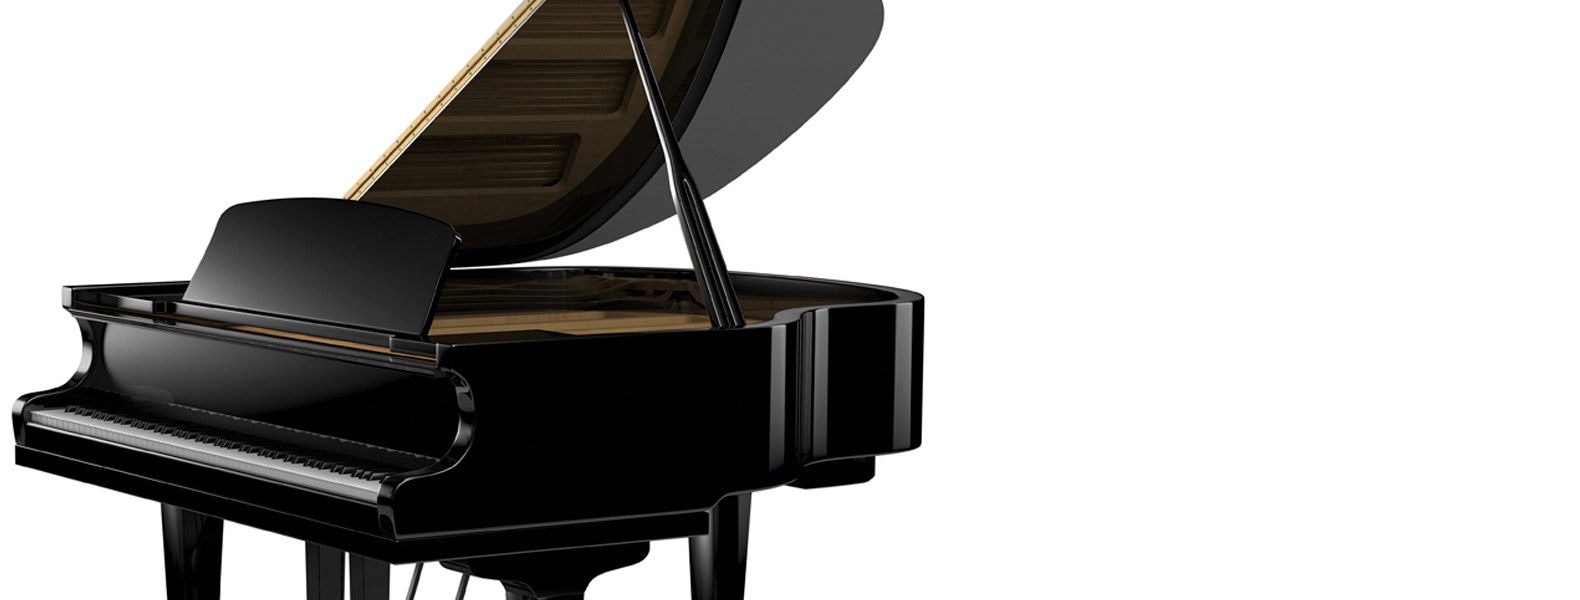 Global supplier of spare parts <br>For Upright & Grand Pianos